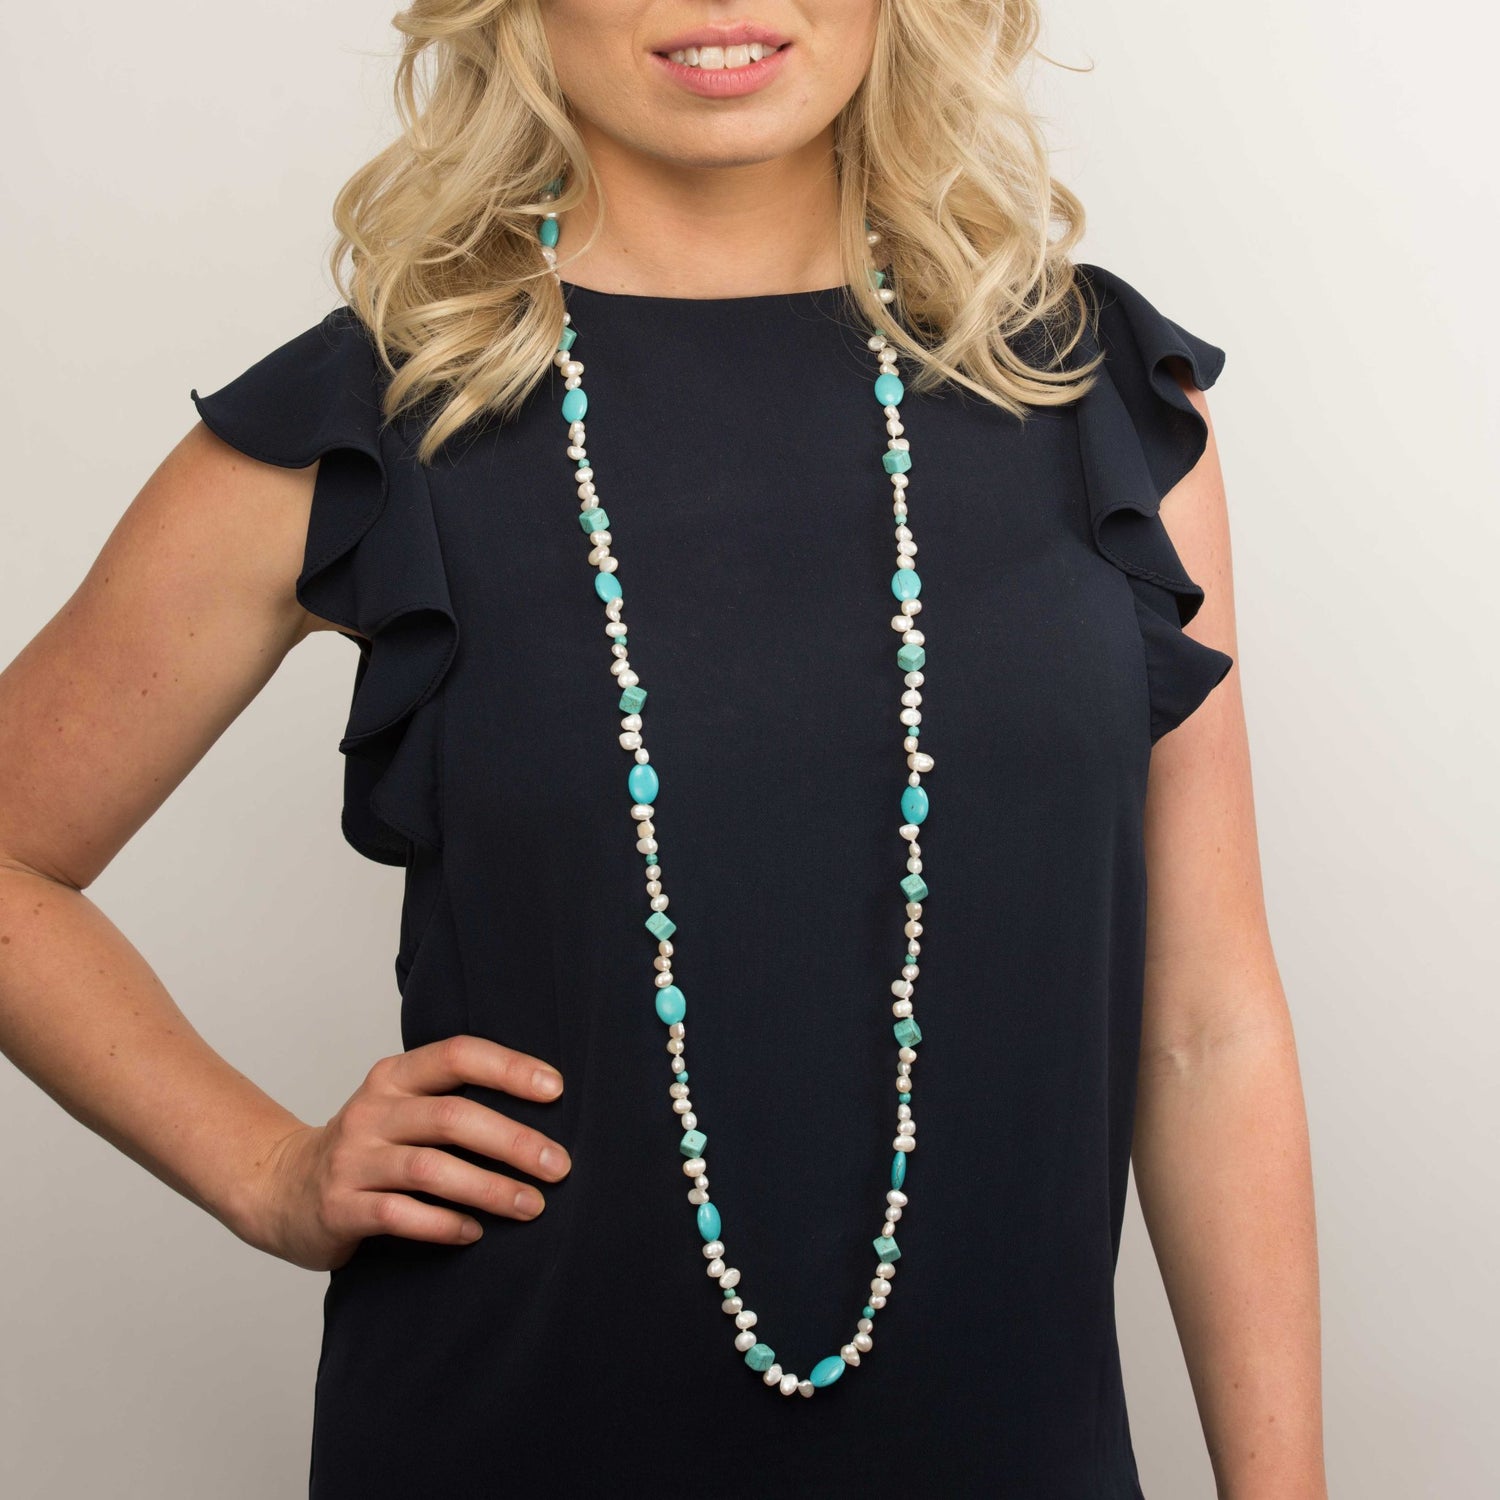 Turquoise & Pearl Necklace - Timeless Pearl